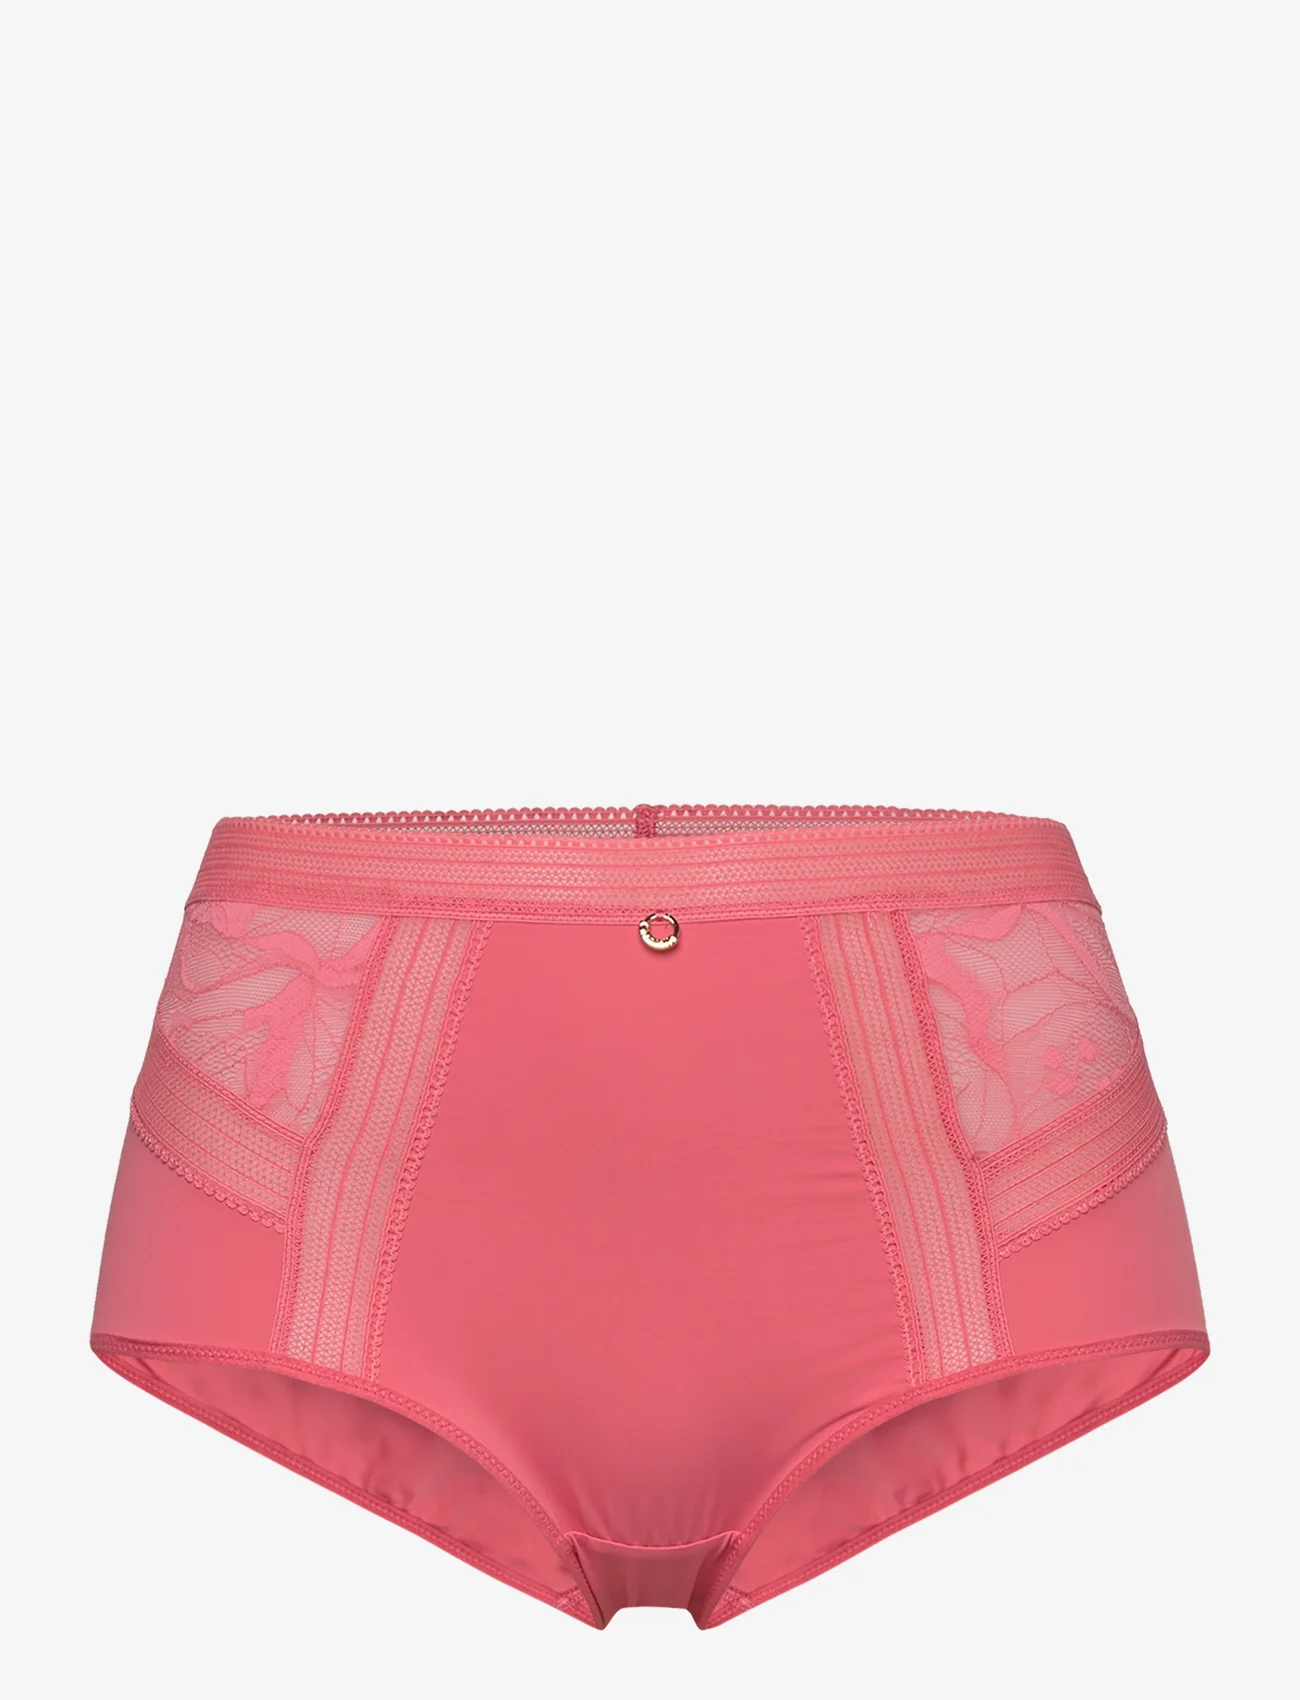 Chantelle Beach - True lace High-waisted full brief - panties - pink rose - 0